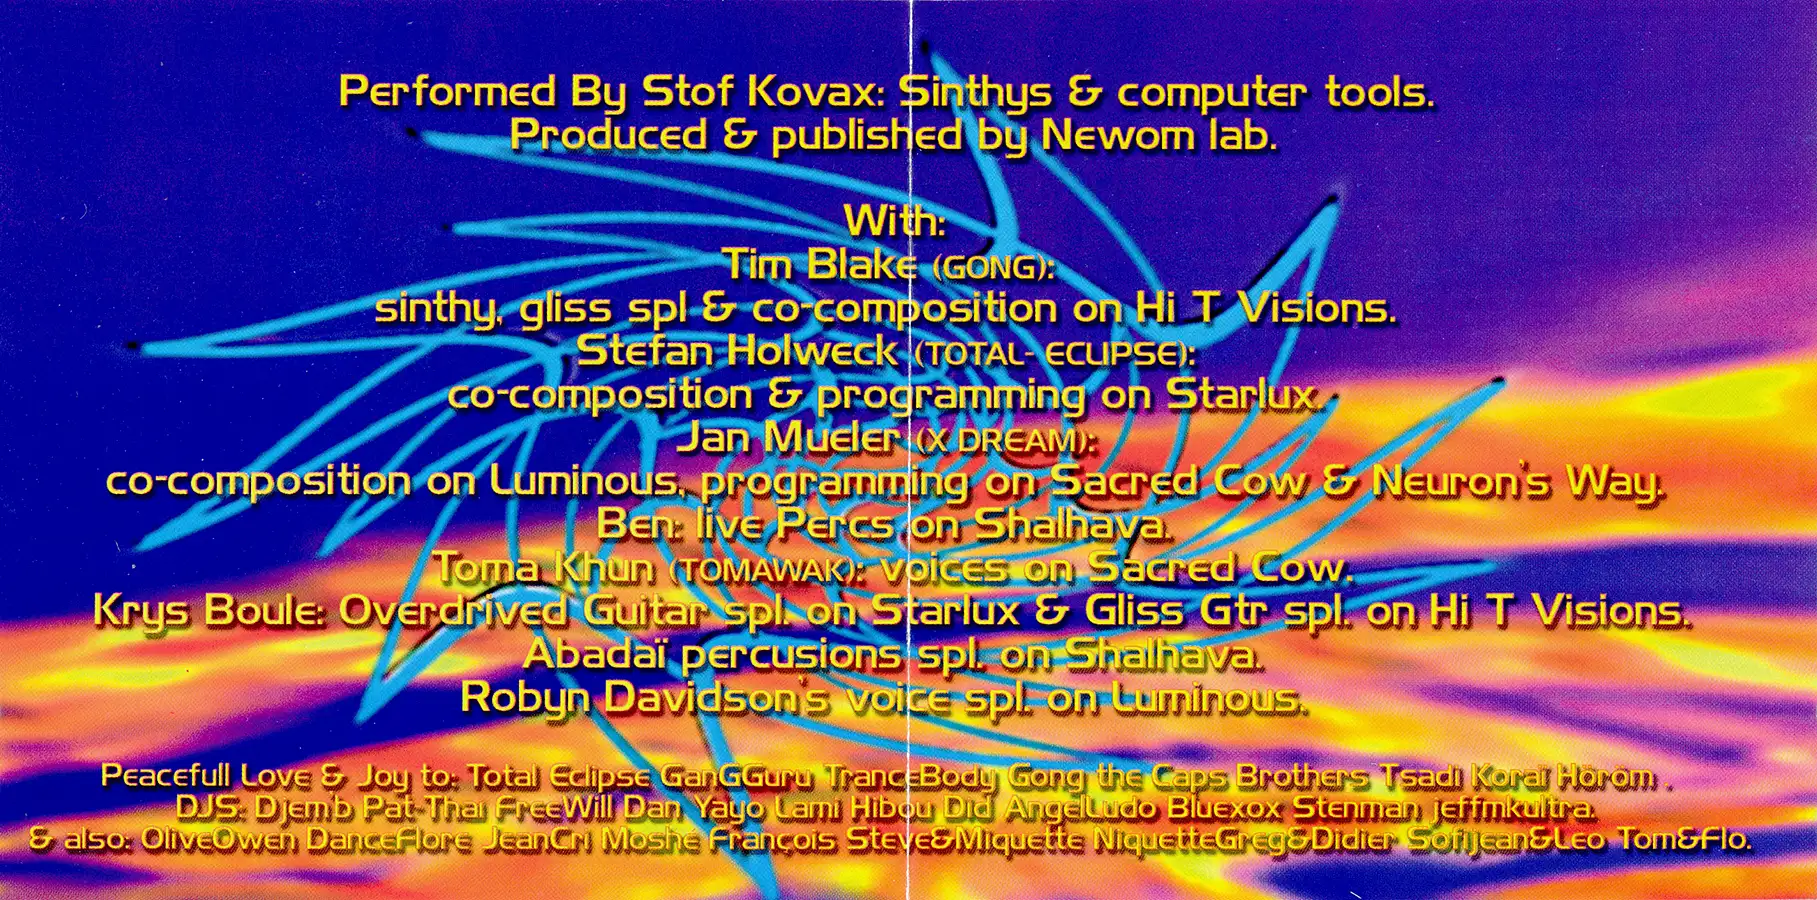 Stof Co by album, from 1998 at PsyDB